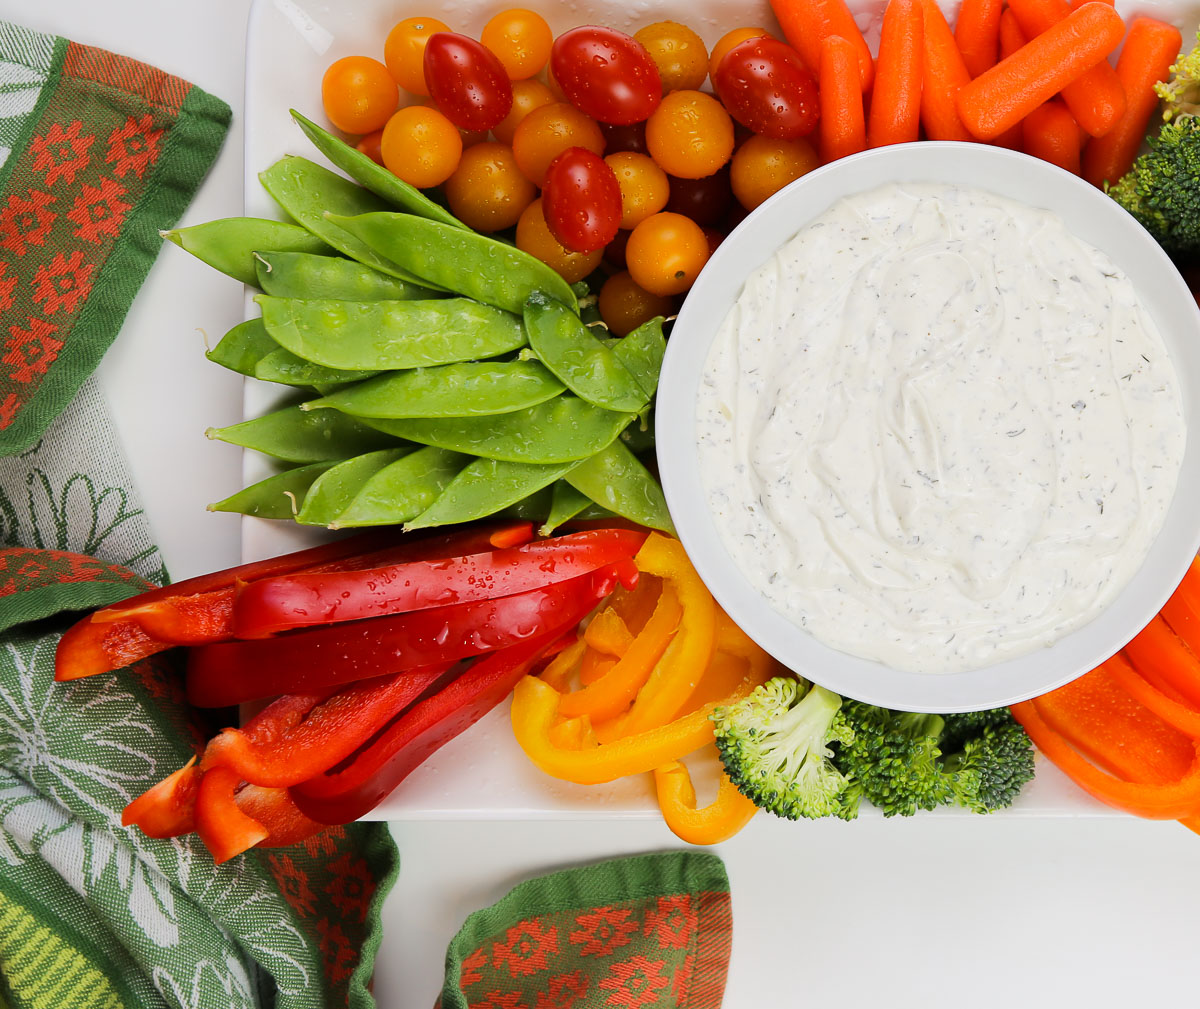 Dill Dip and Vegetables